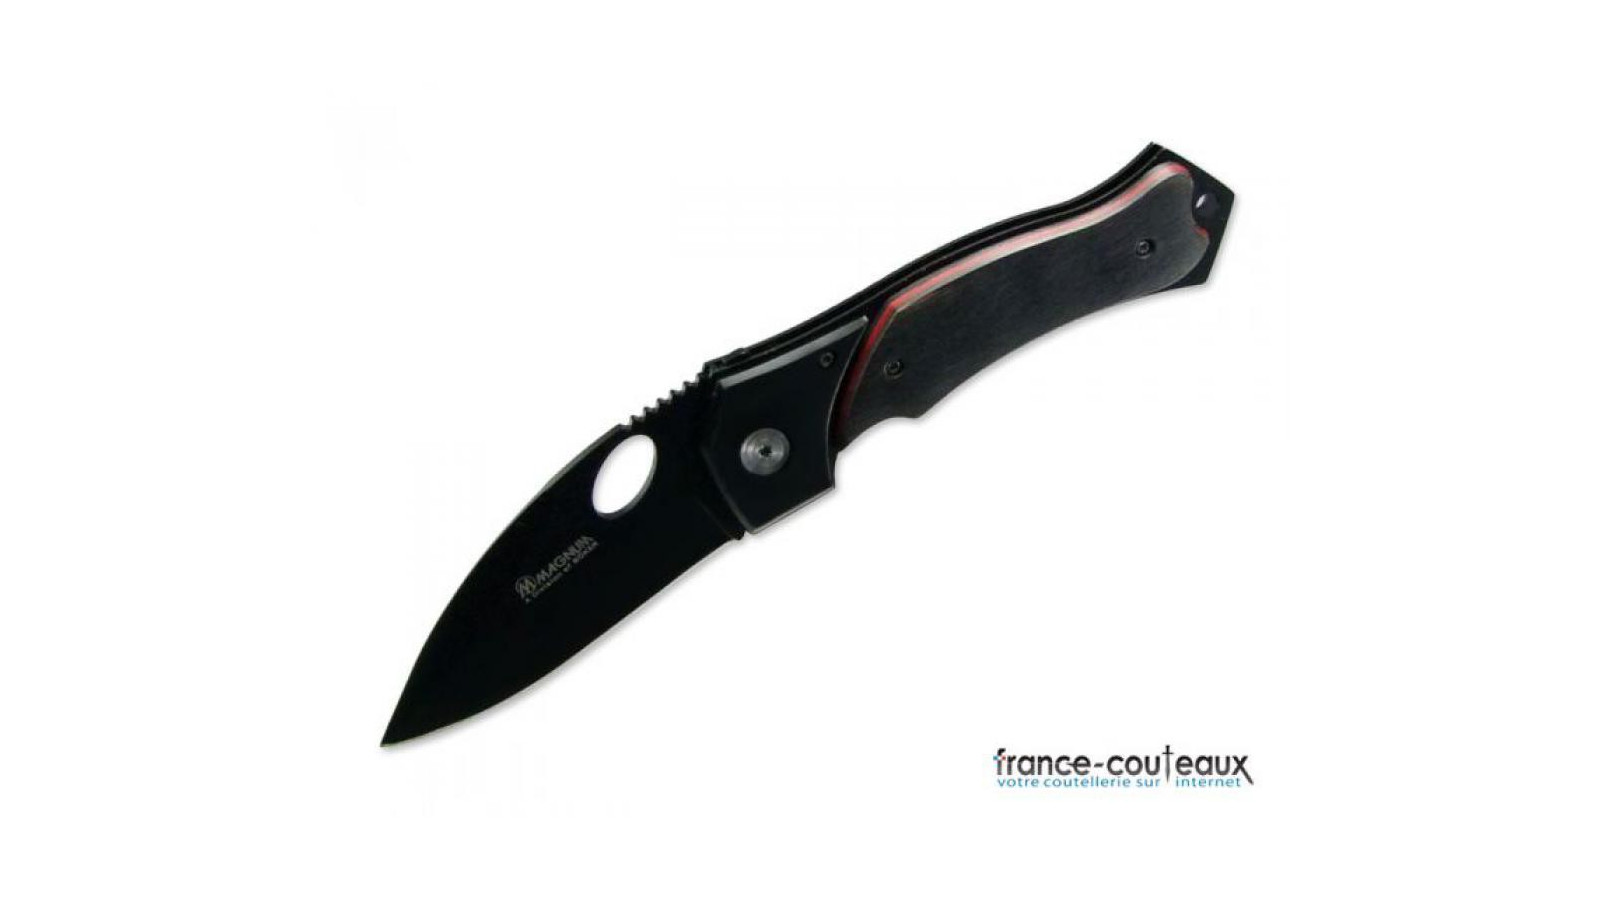 Couteau Black Crow - Magnum by Boker - 01YA117